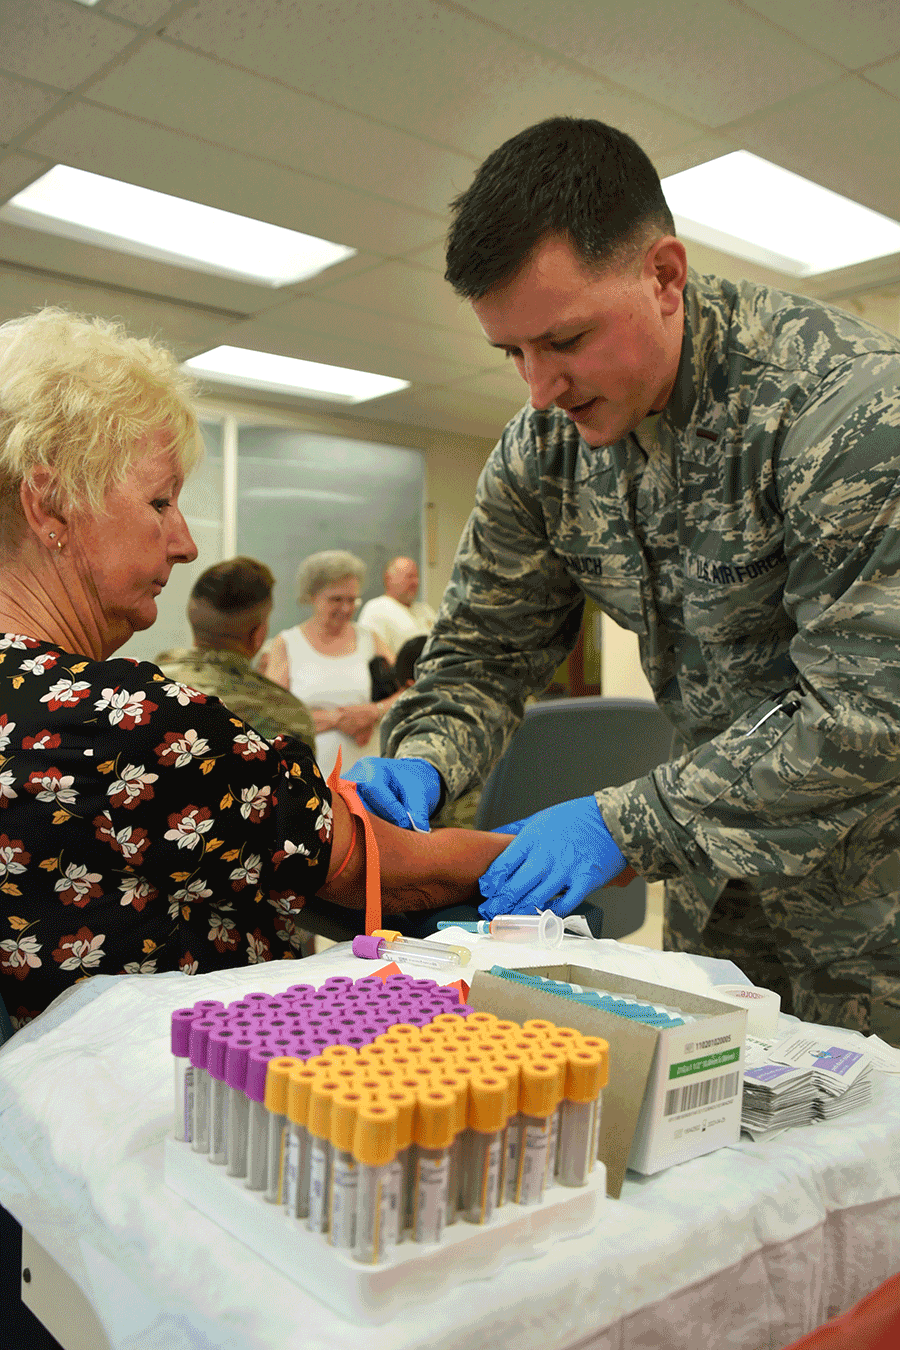 An Airman conducts a blood draw  on woman.